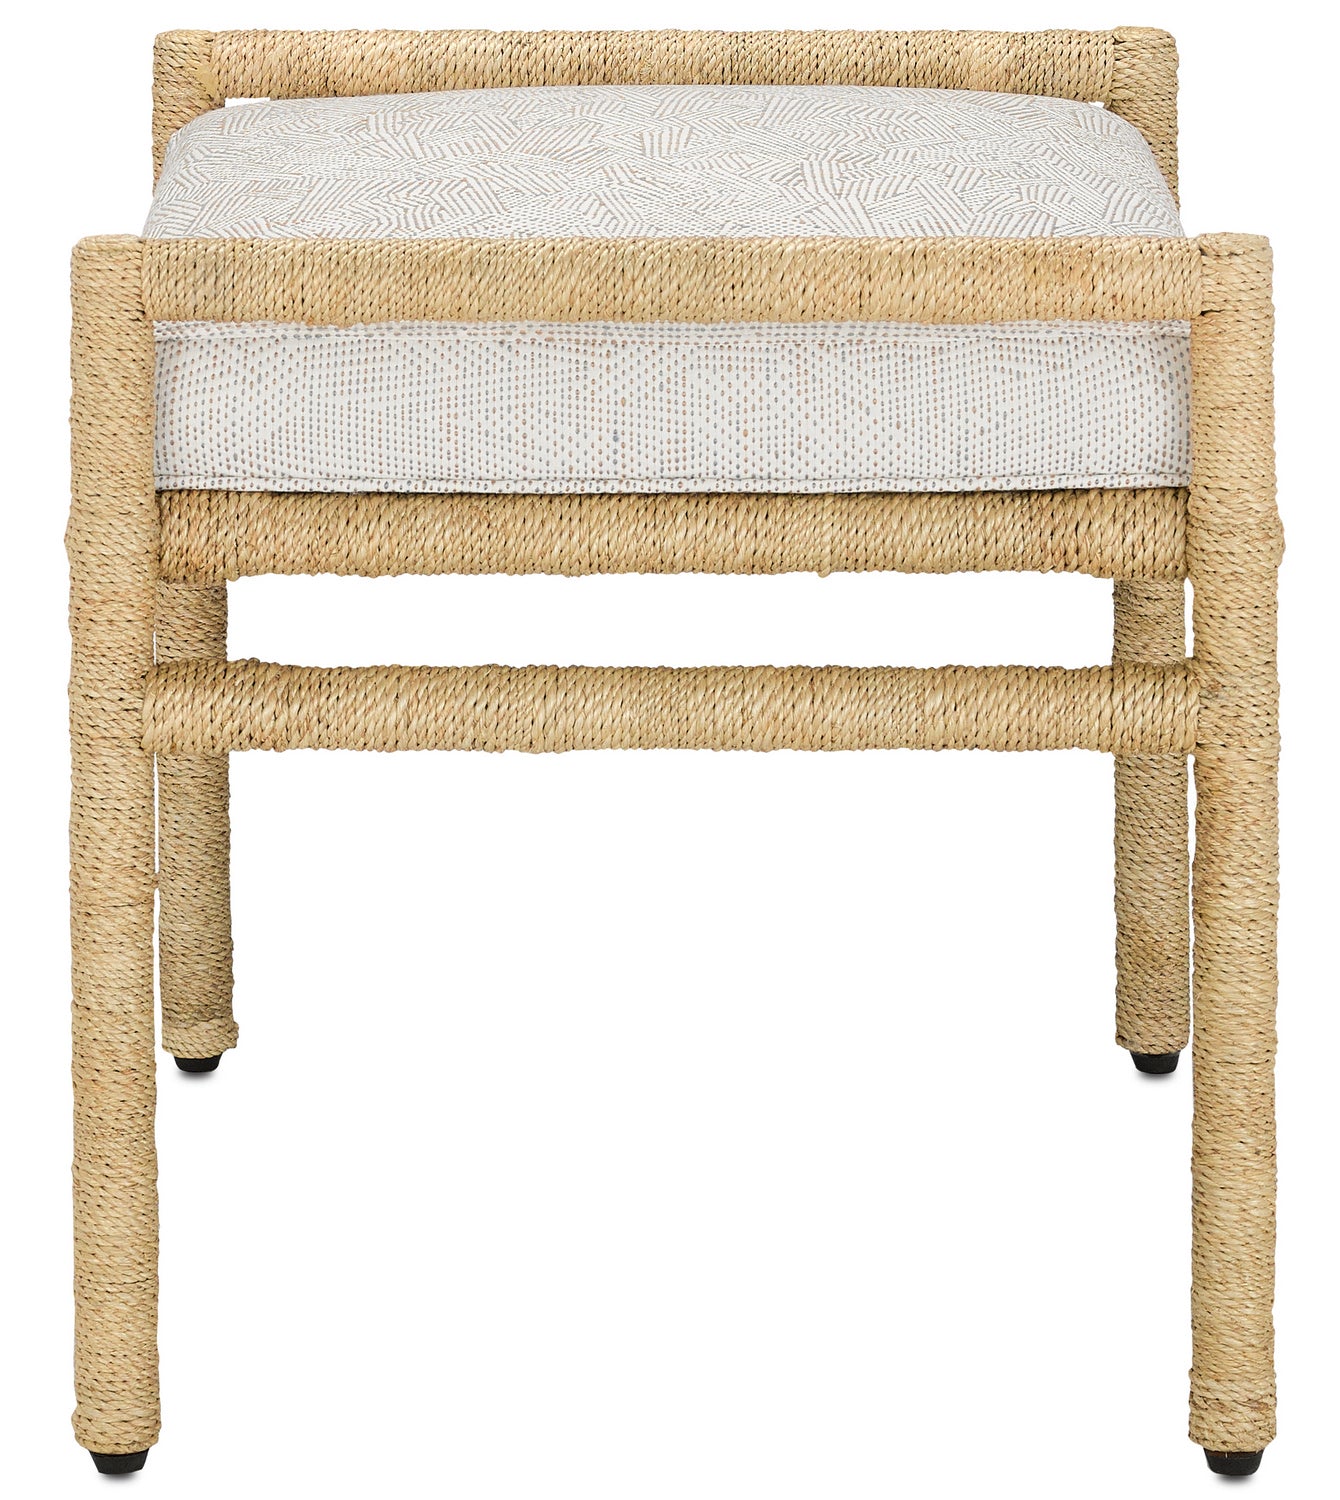 Ottoman from the Olisa collection in Natural finish